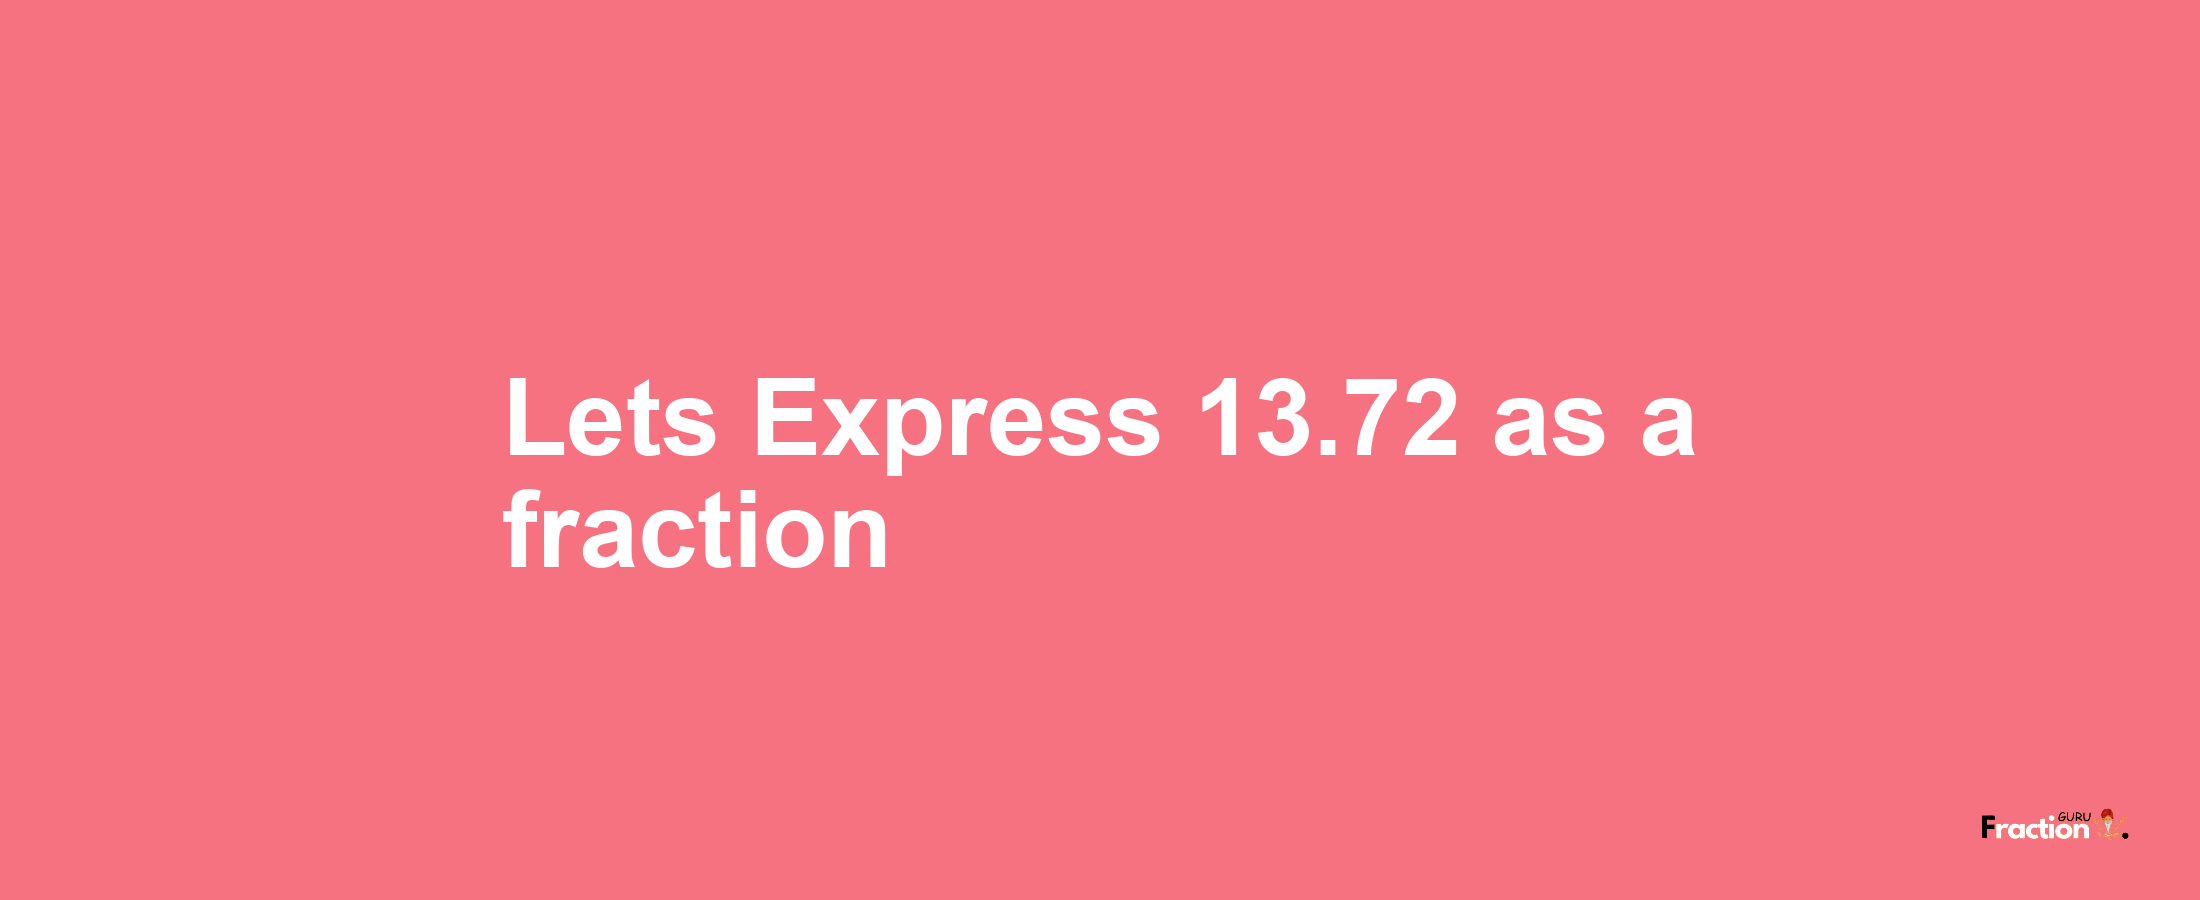 Lets Express 13.72 as afraction